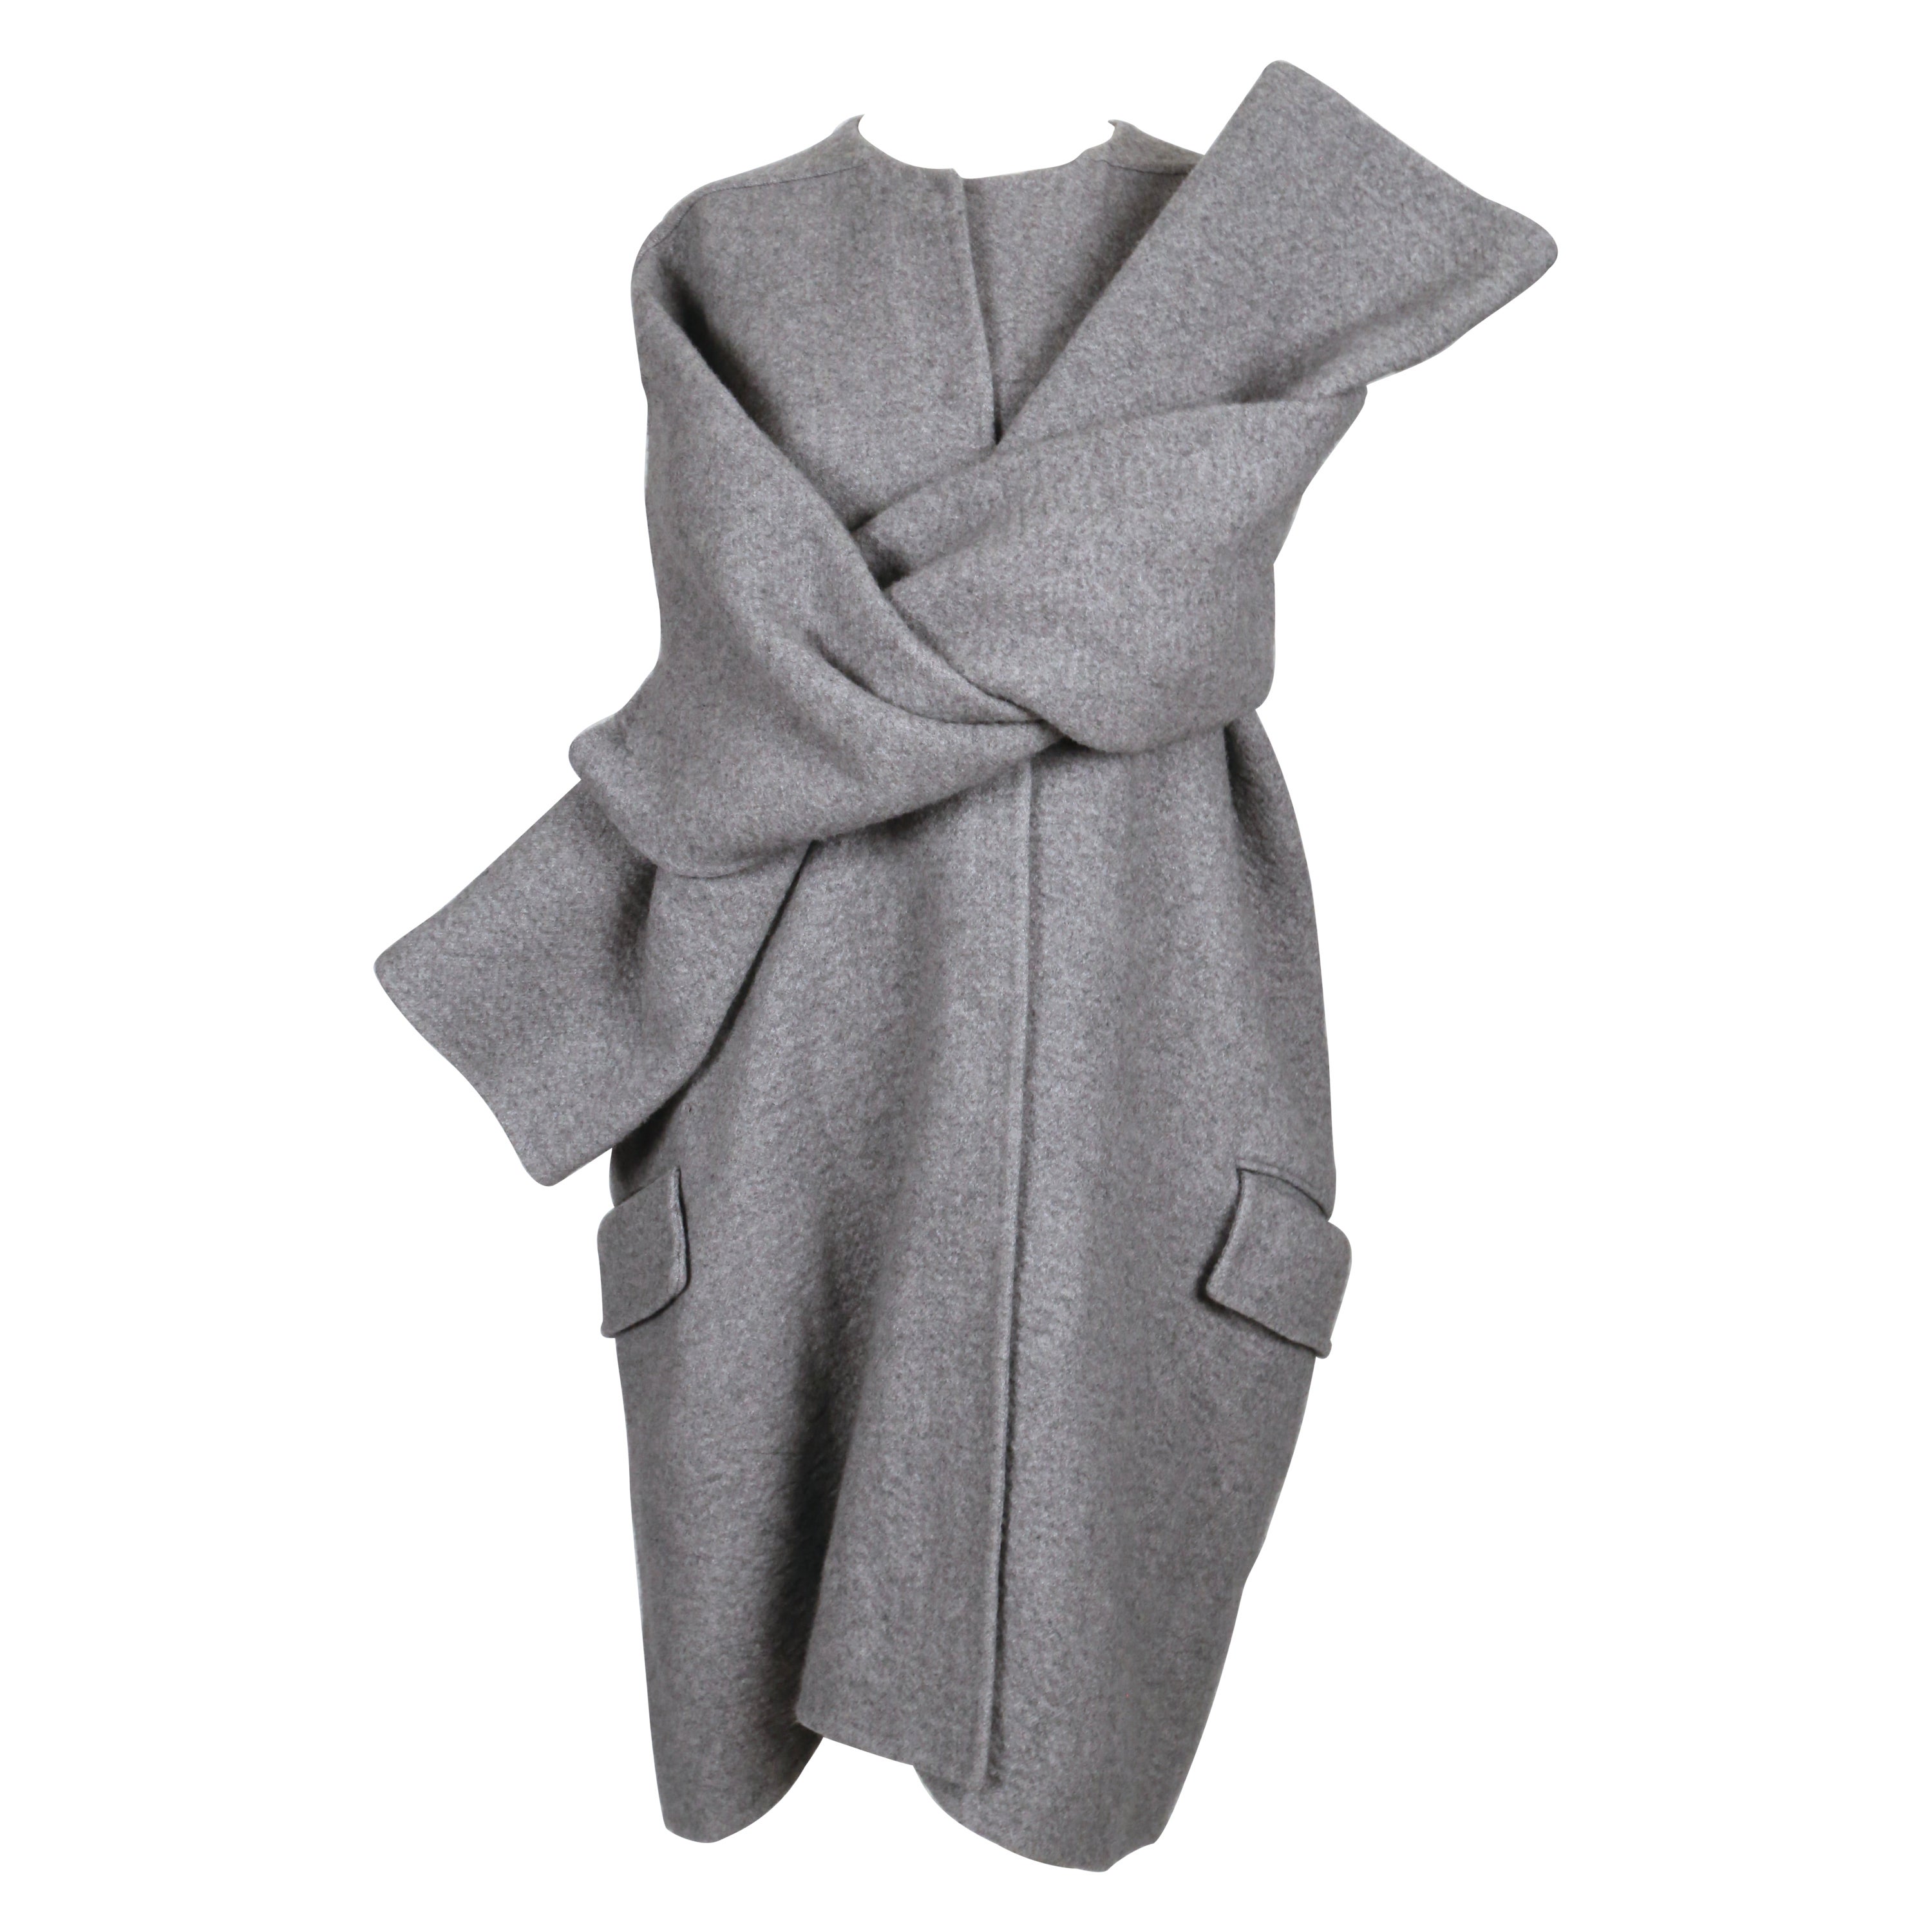 2013 CELINE by PHOEBE PHILO grey cashmere runway coat with exaggerated sleeves For Sale